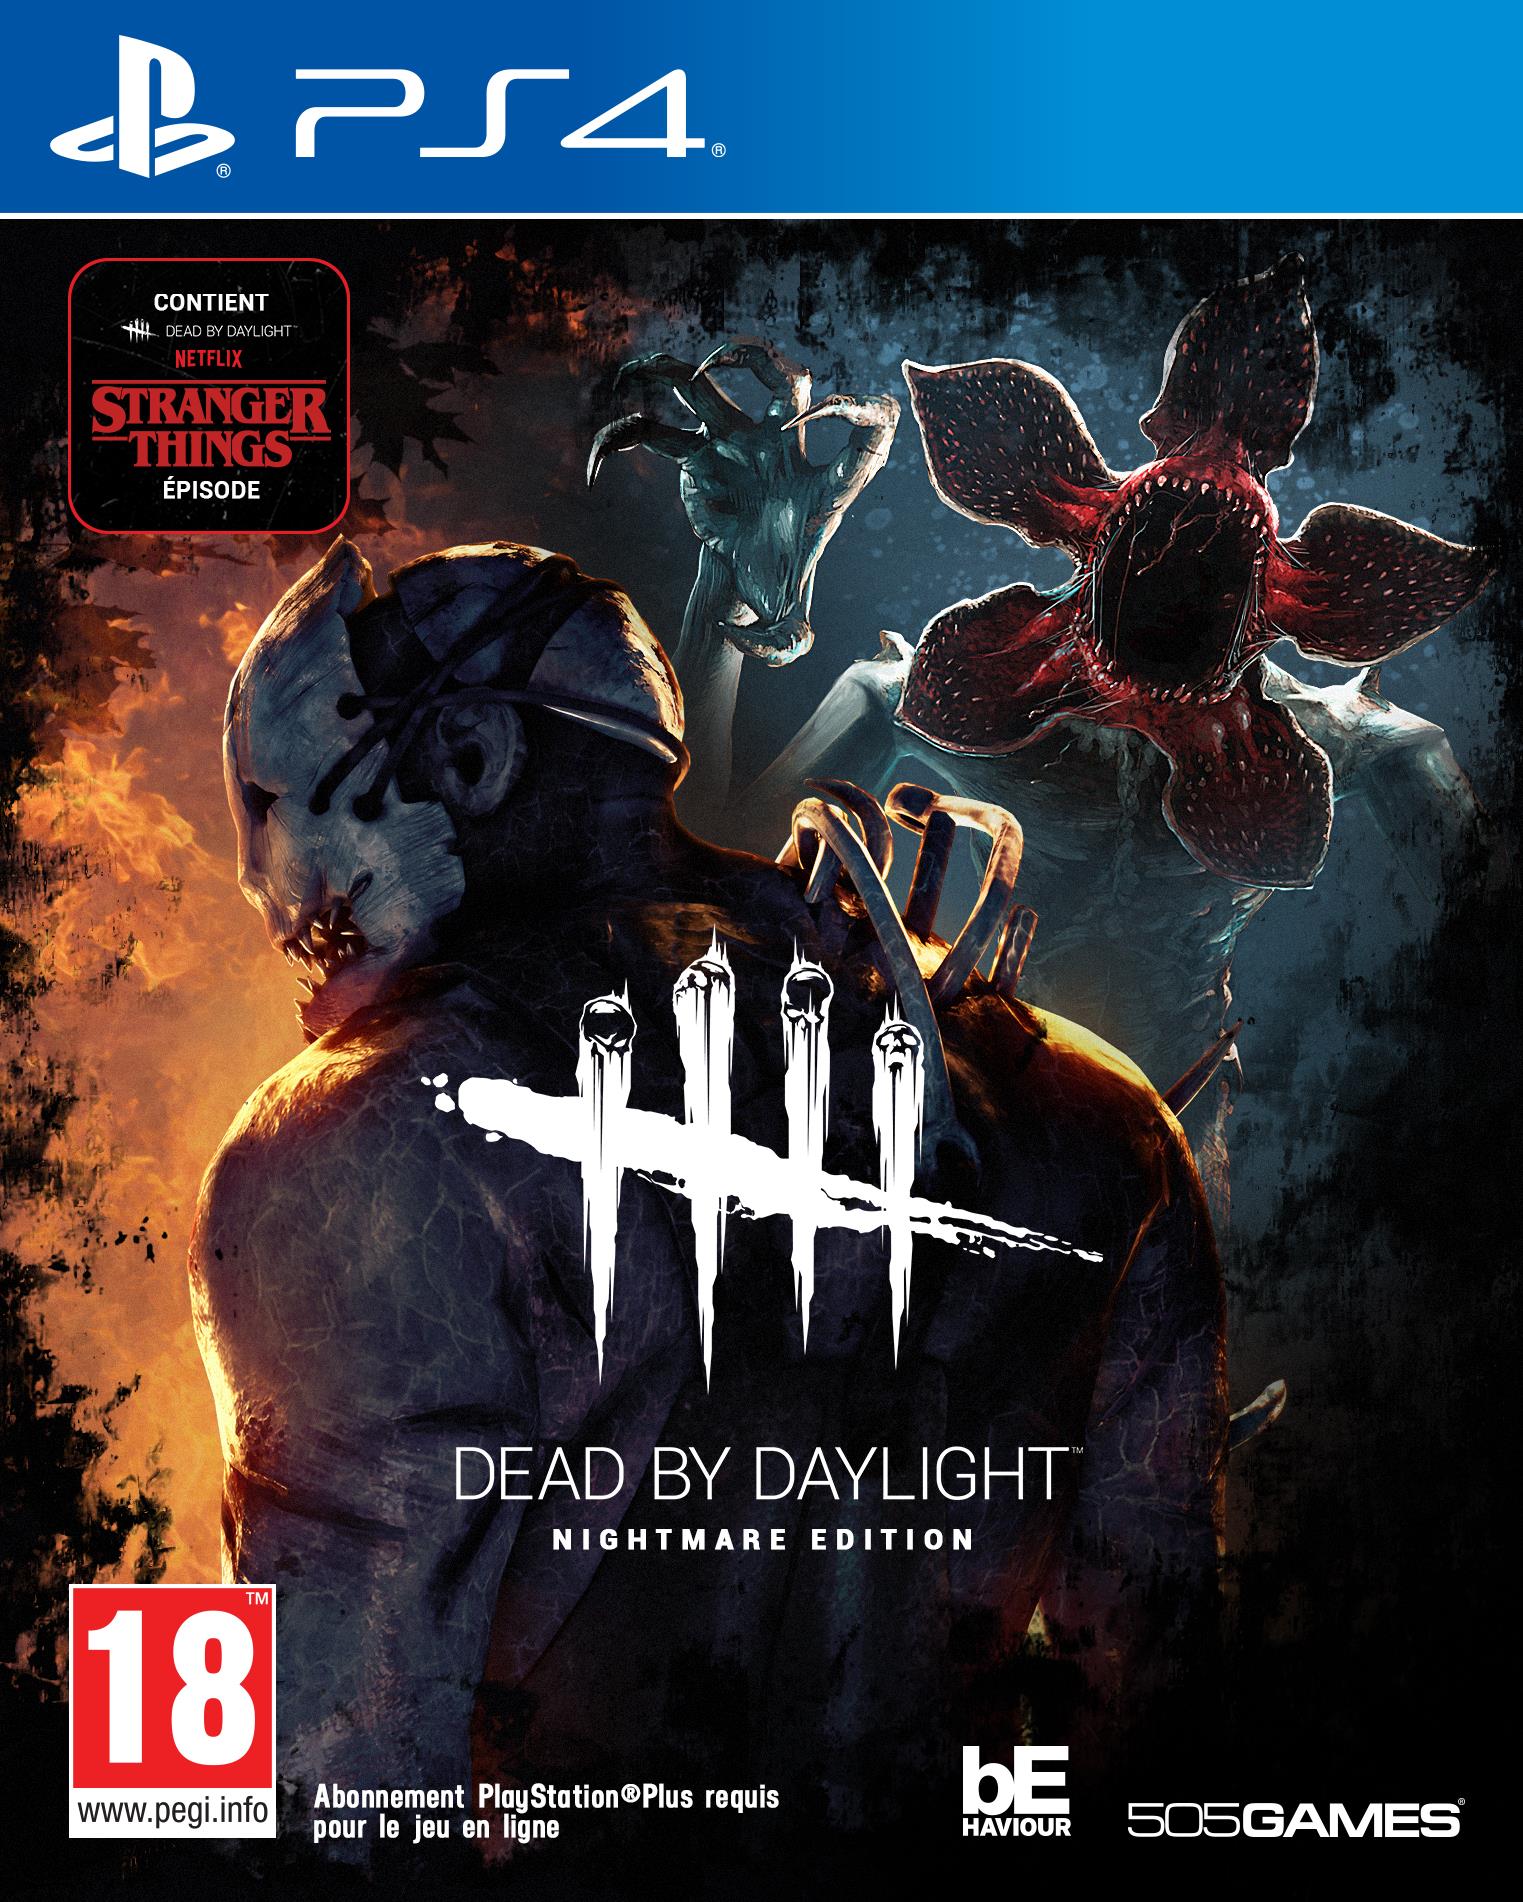 § Dead by Daylight Nightmare Edition